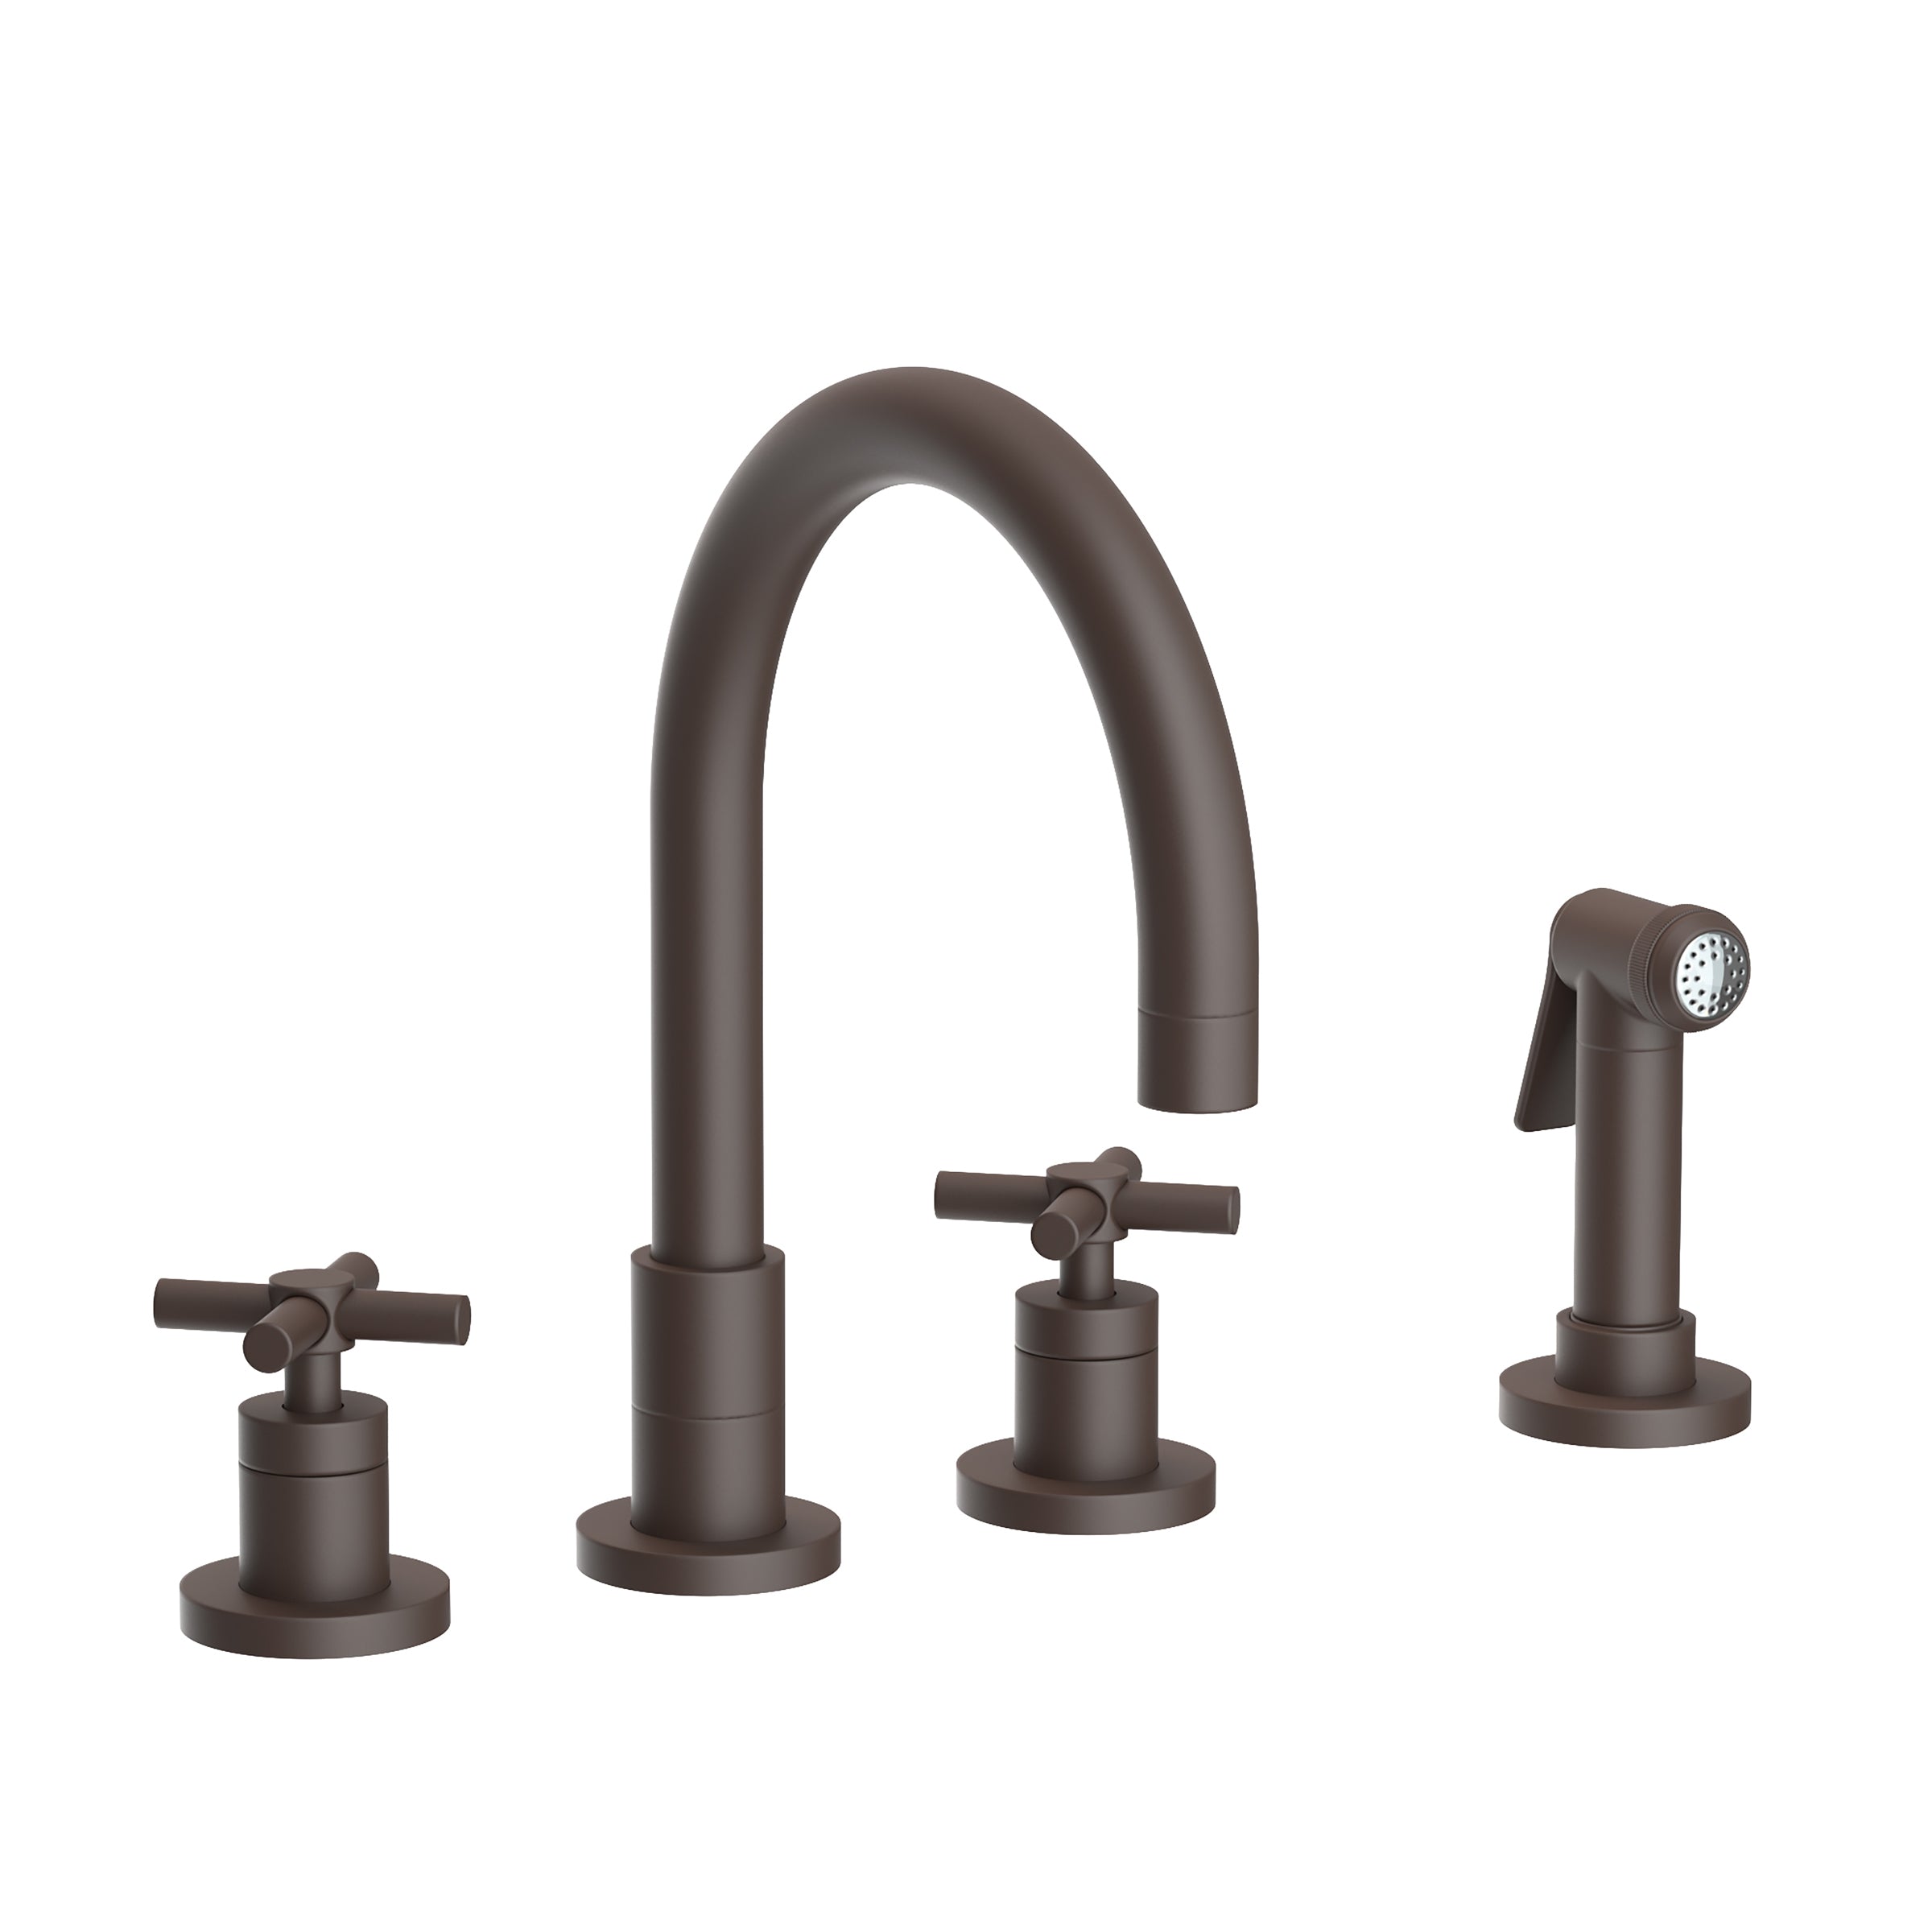 Newport Brass East Linear Kitchen Faucet with Side Spray